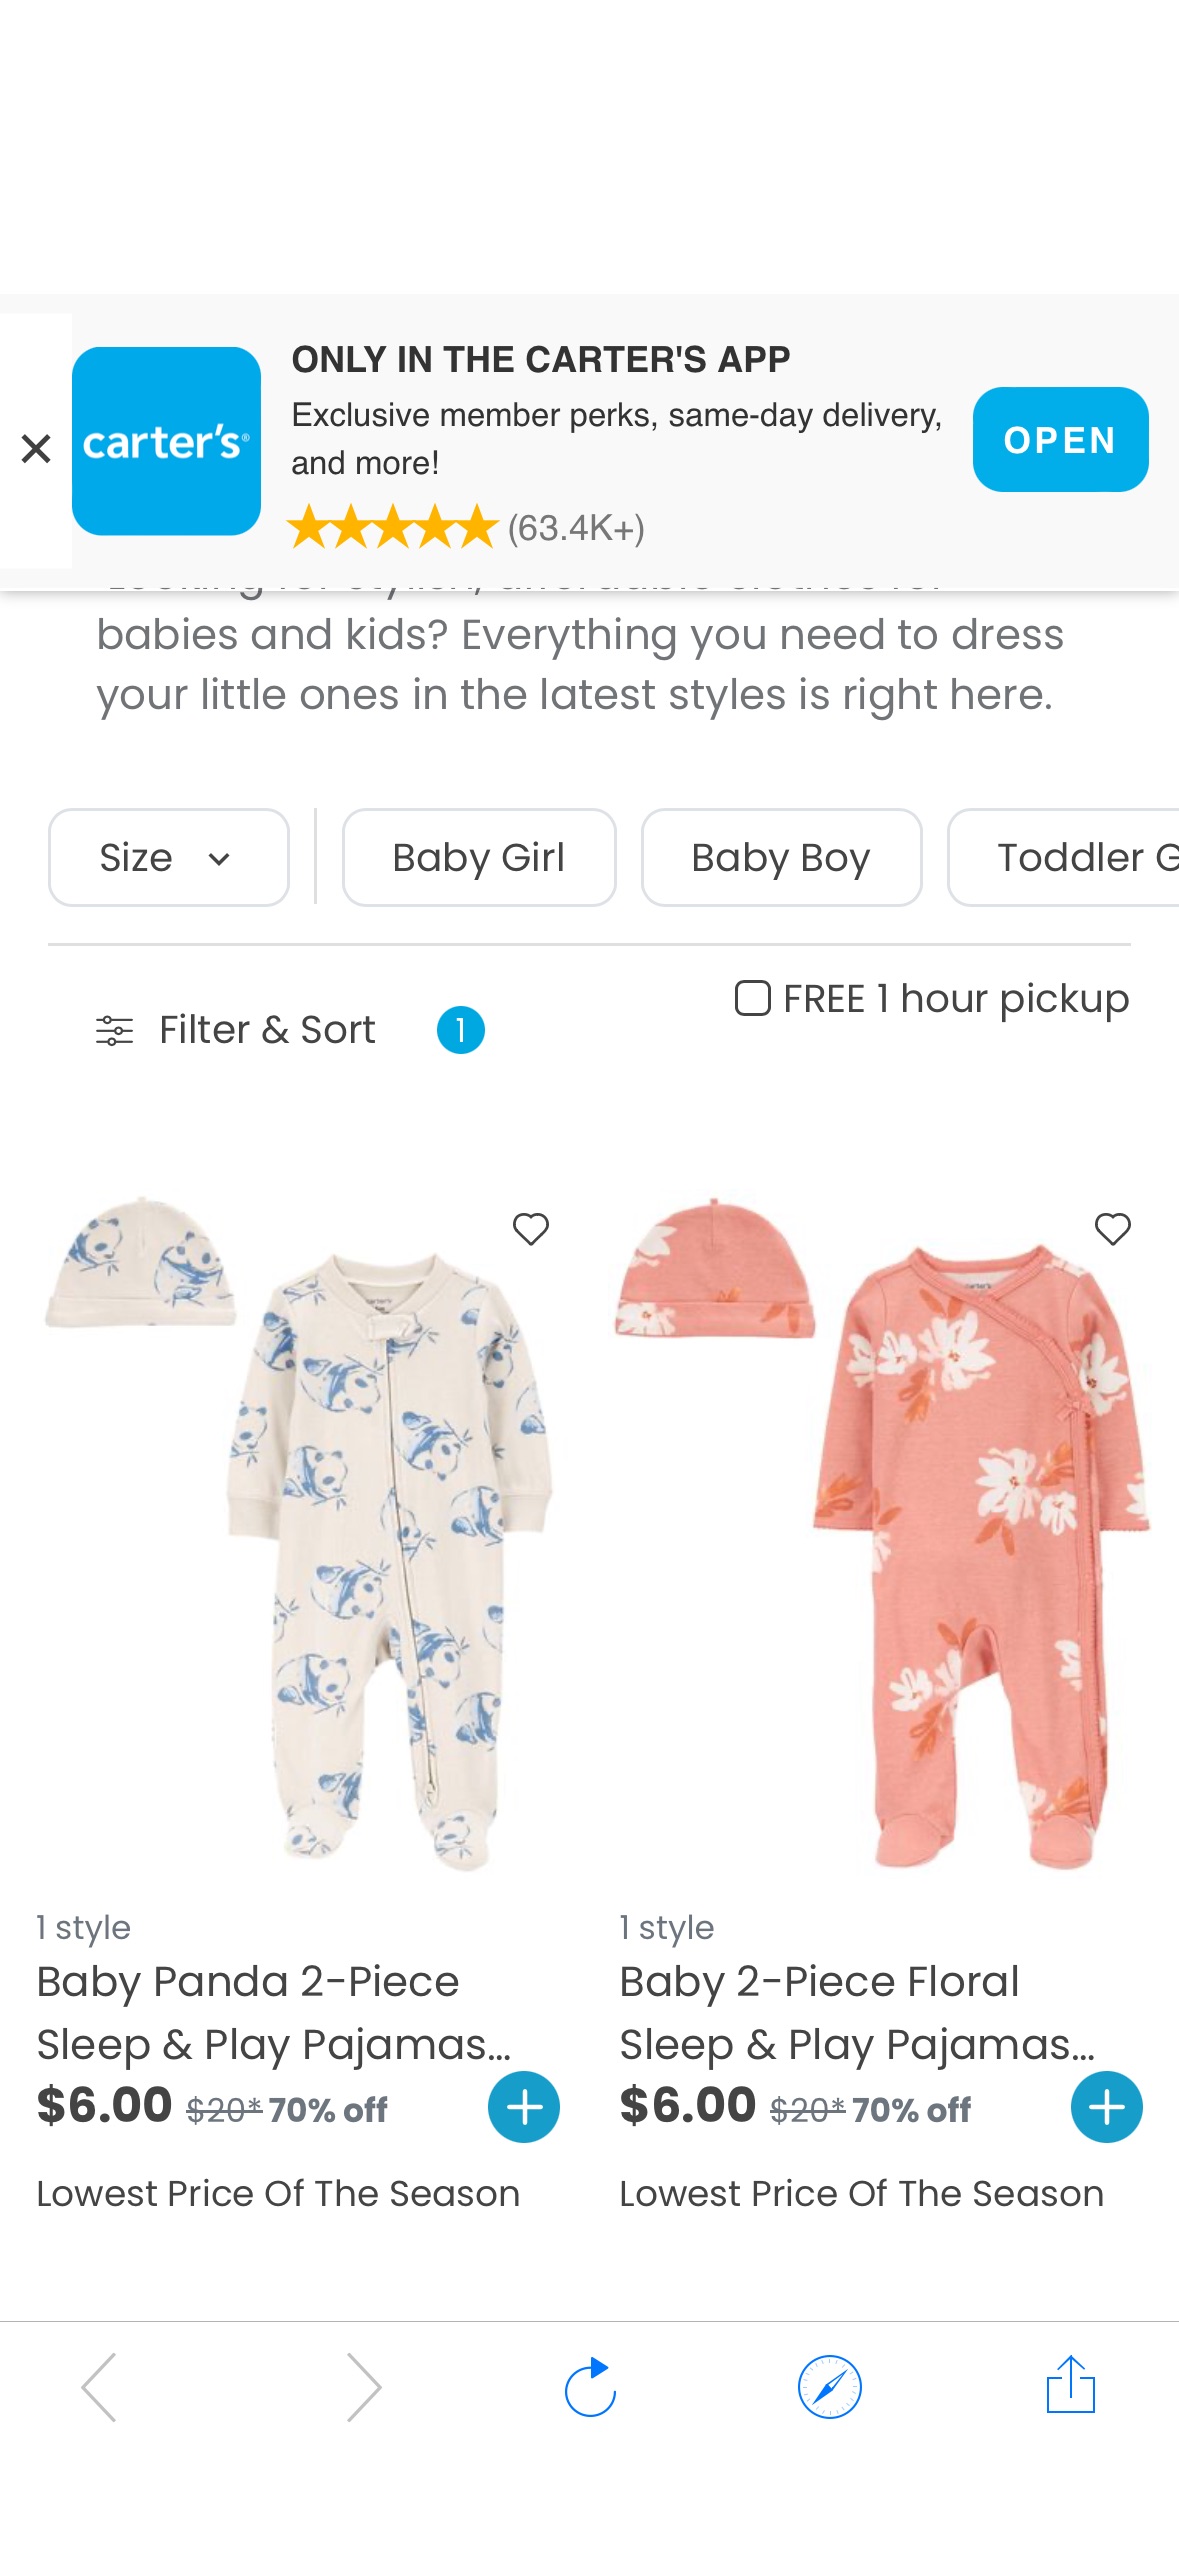 Up to 70% off all baby